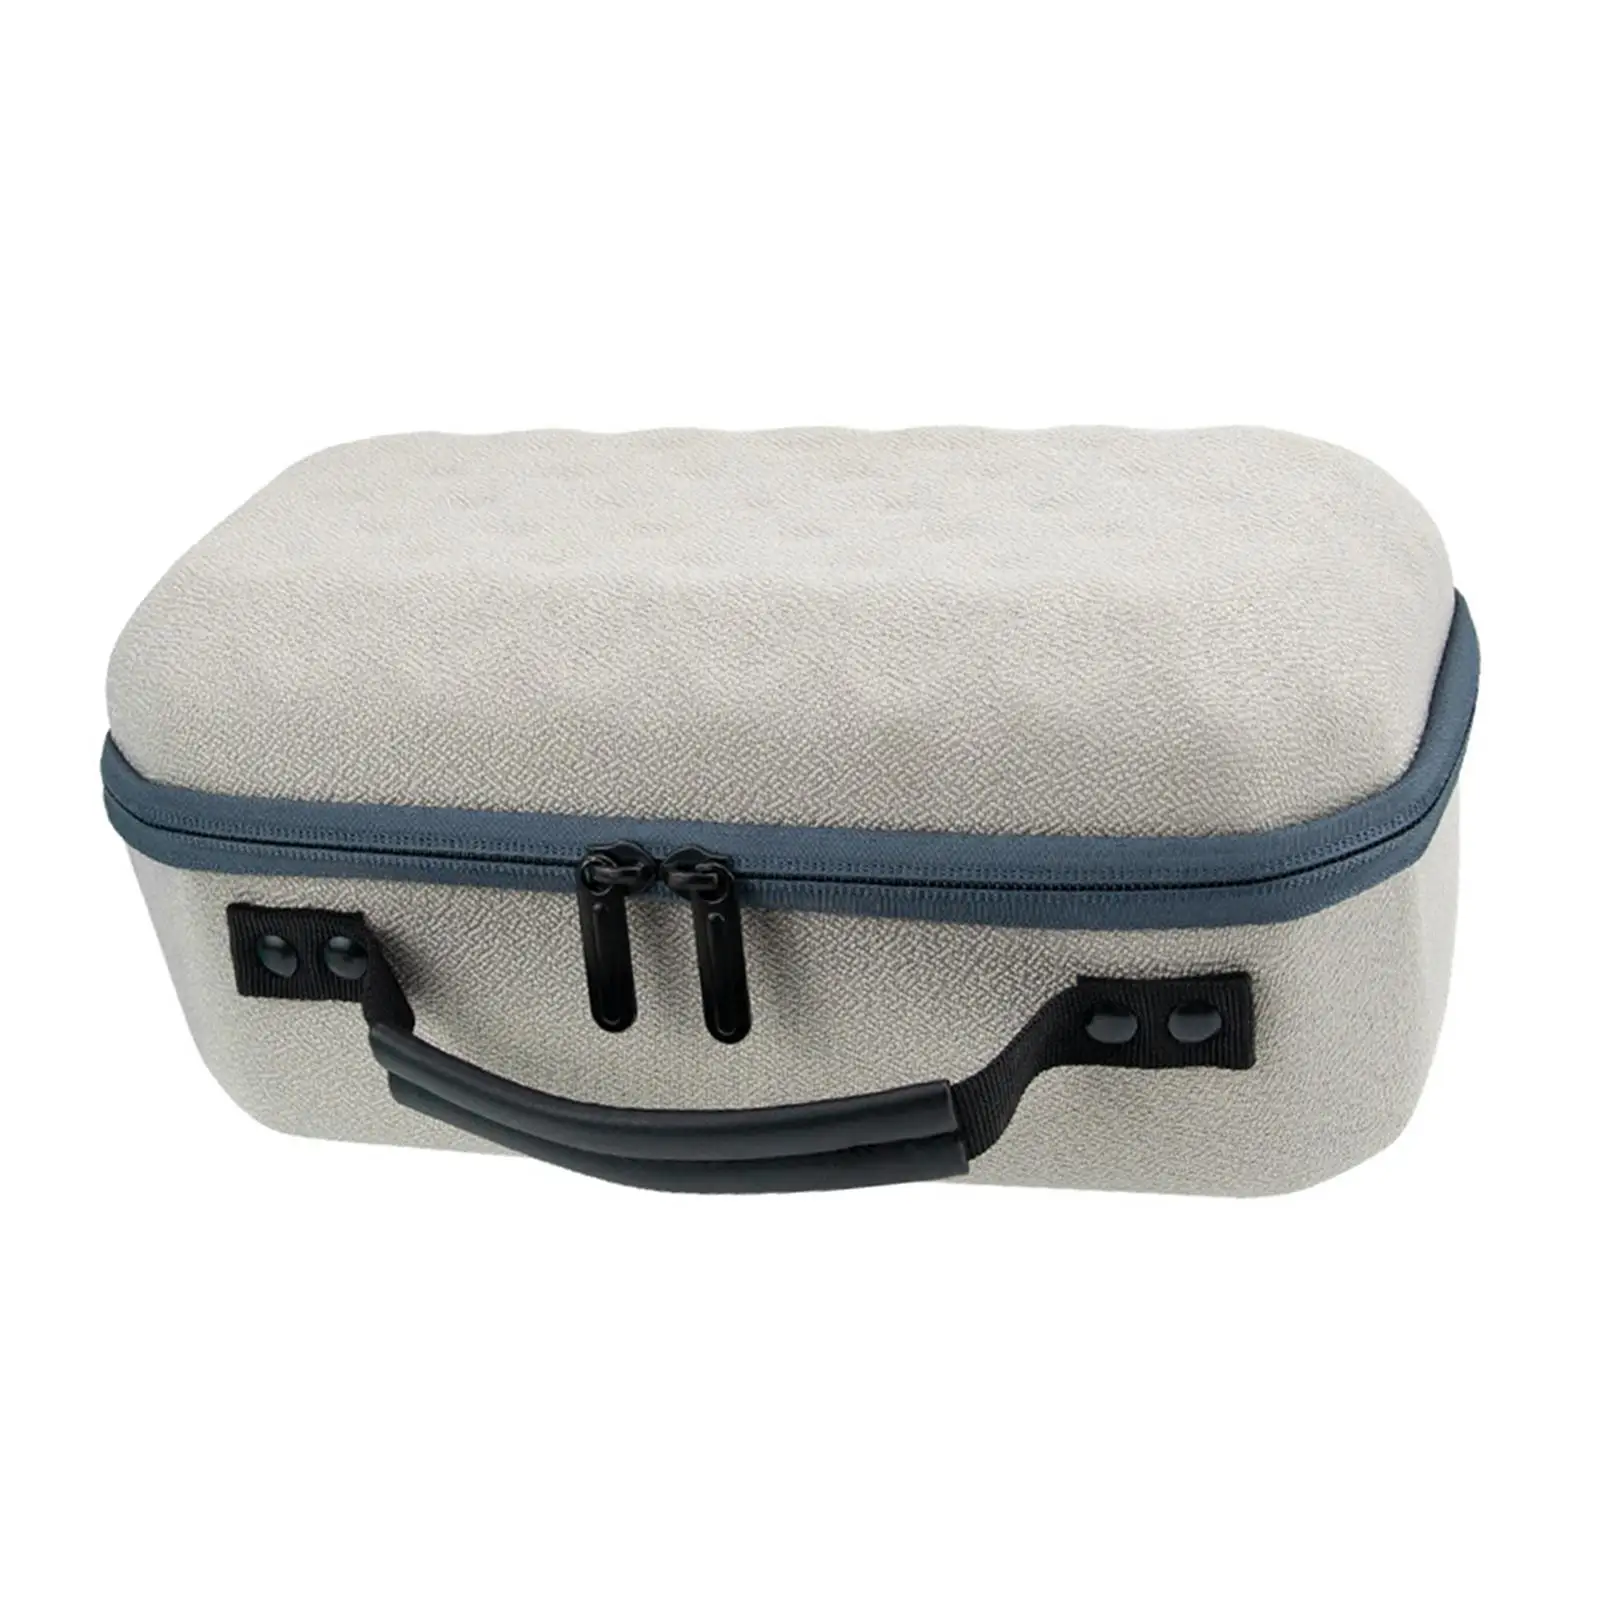 Bag Storage Carry Case with Accessories Storage Pockets Oxford Fabric Sleeve for Mini Video